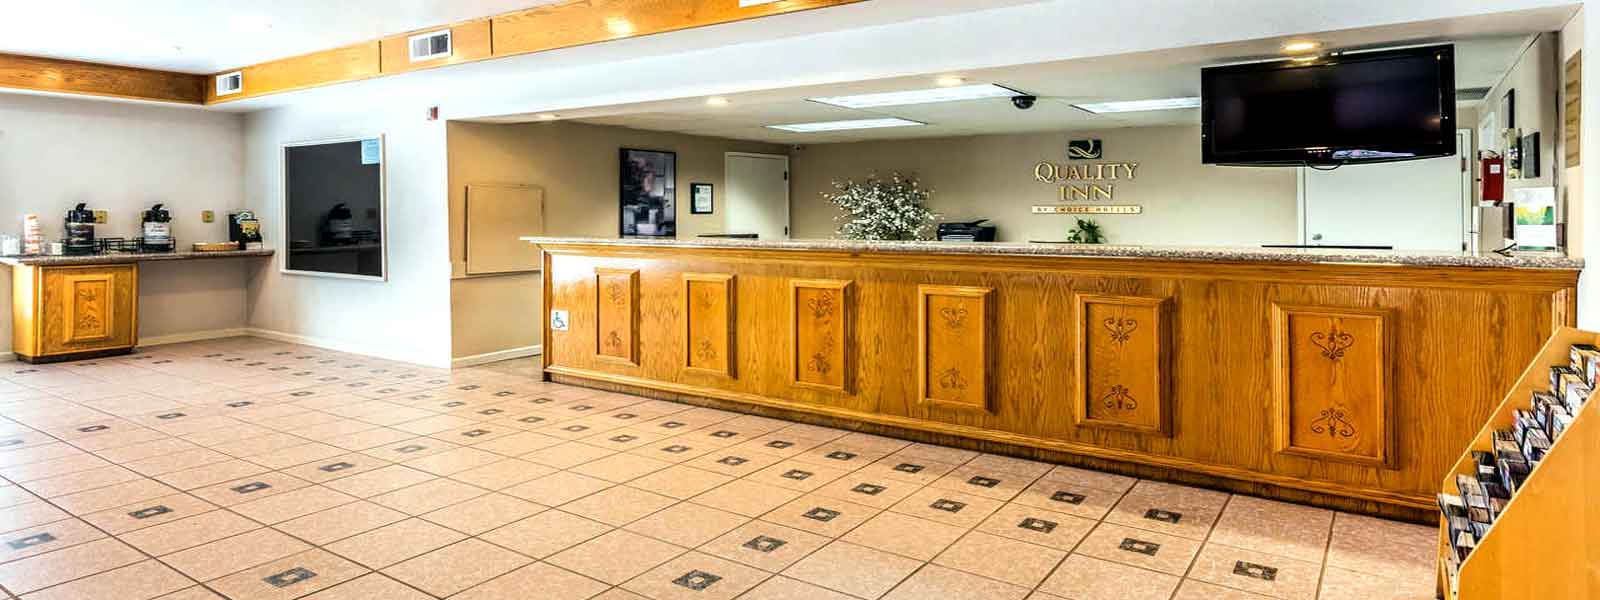 Discount Budget Cheap Affordable Hotels Motels Quality Inn Downtown State University